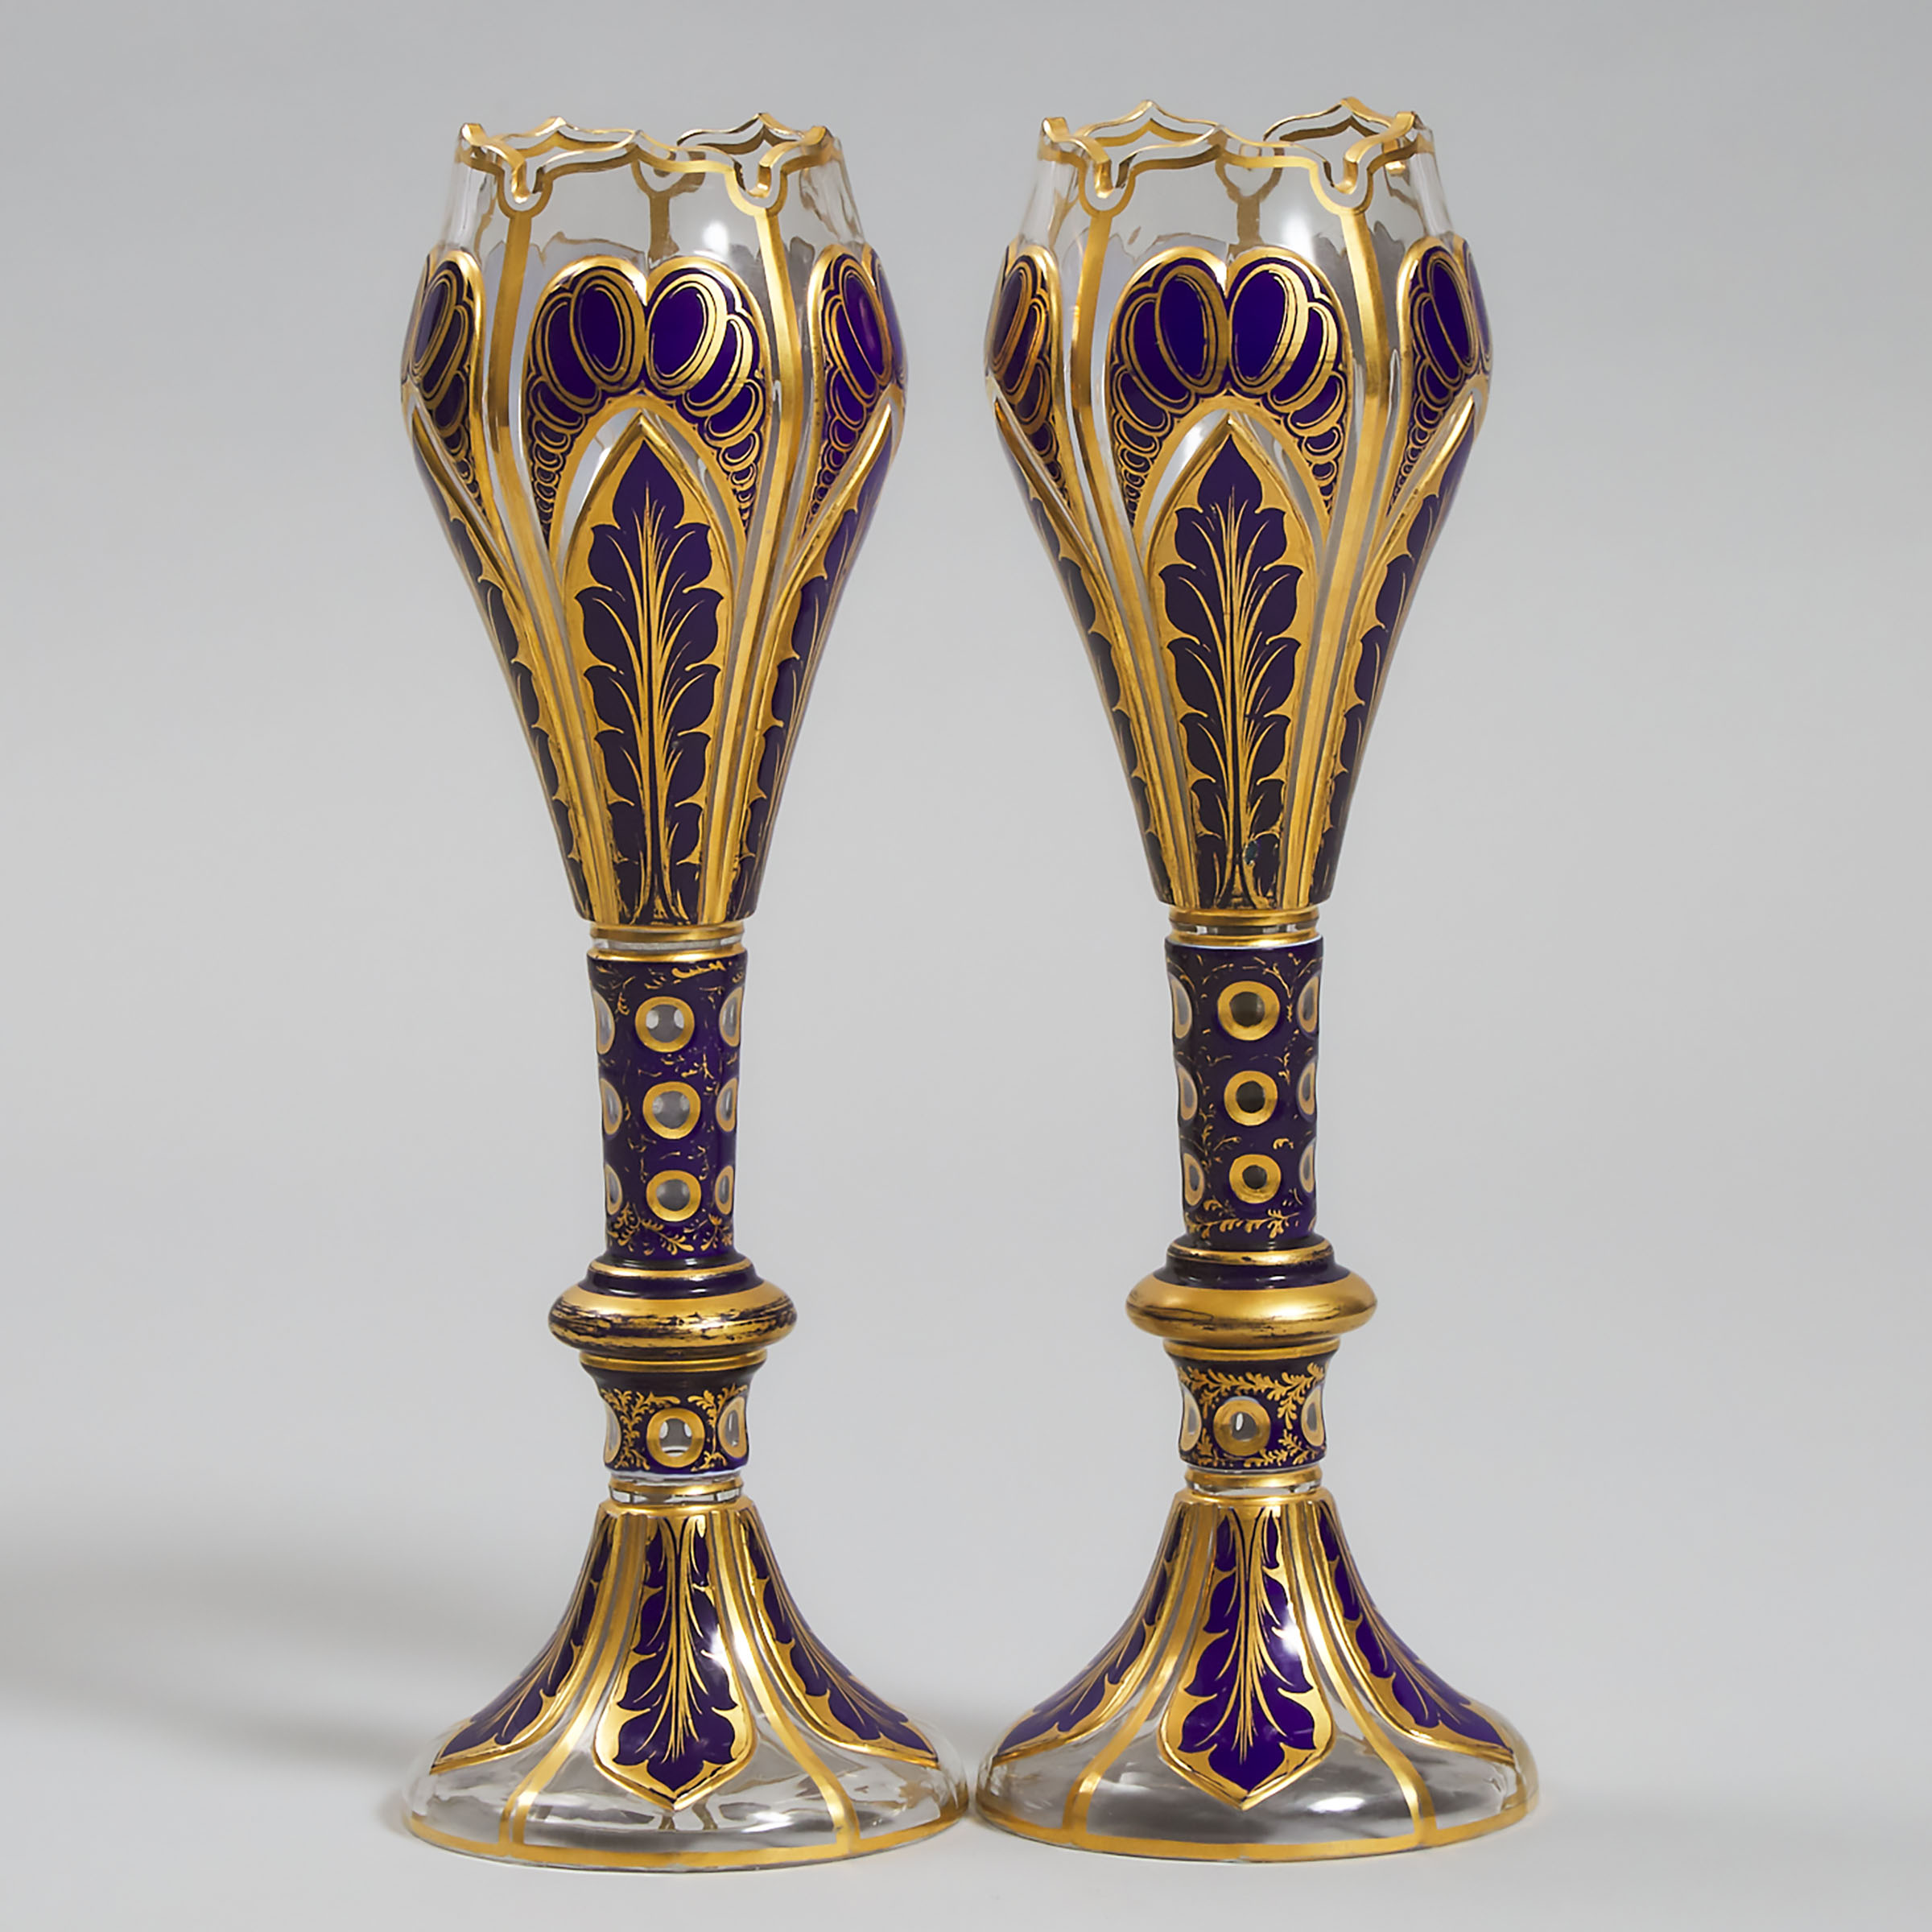 Pair of Bohemian Blue Overlaid, Cut and Gilt Glass Vases, late 19th century